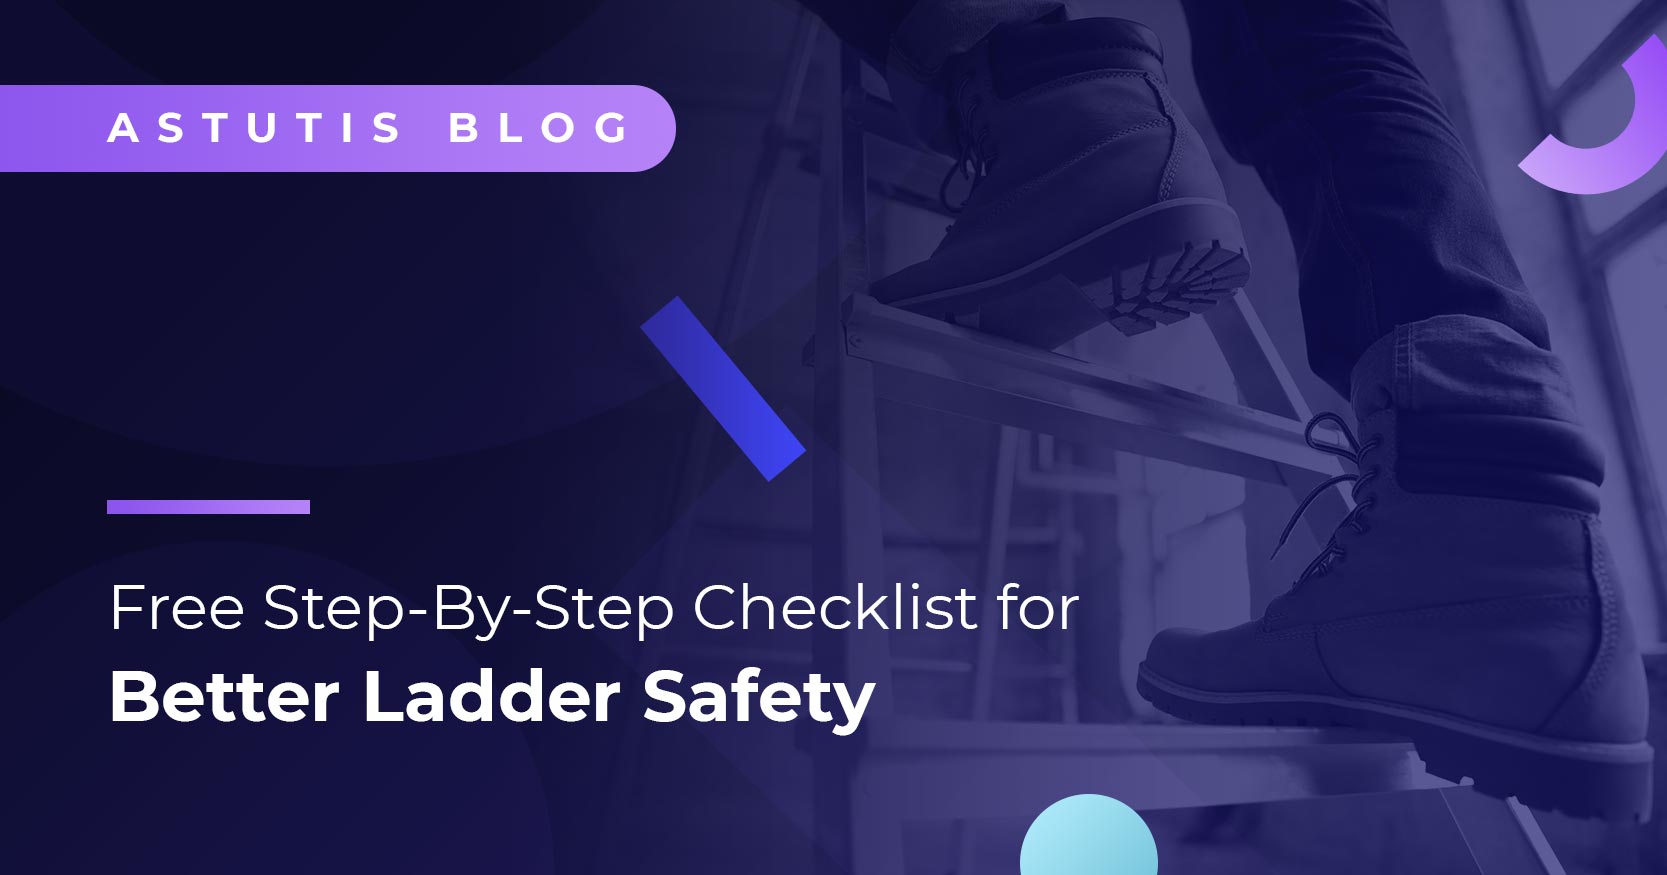 Free Inspection Checklist for Better Ladder Safety  Image